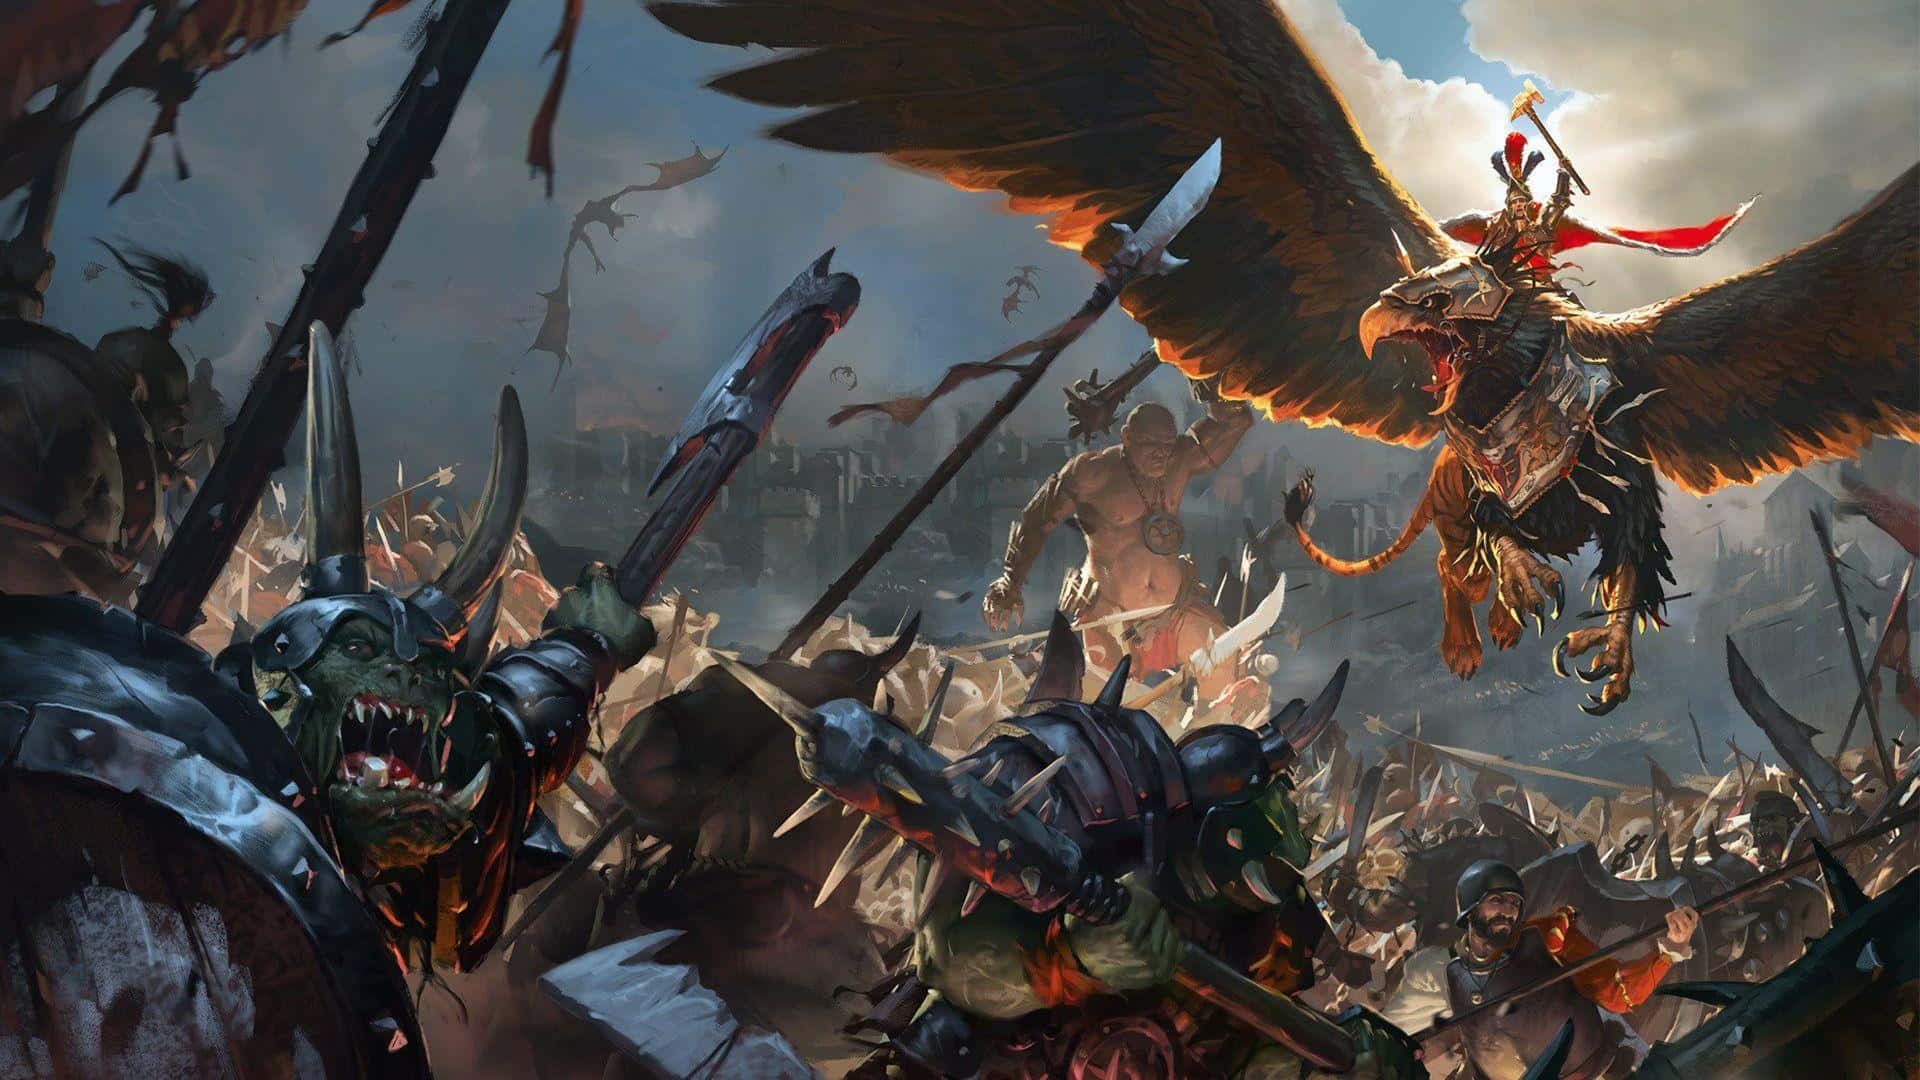 Take command of your armies and unleash the power of a god with HD Total War Warhammer II.